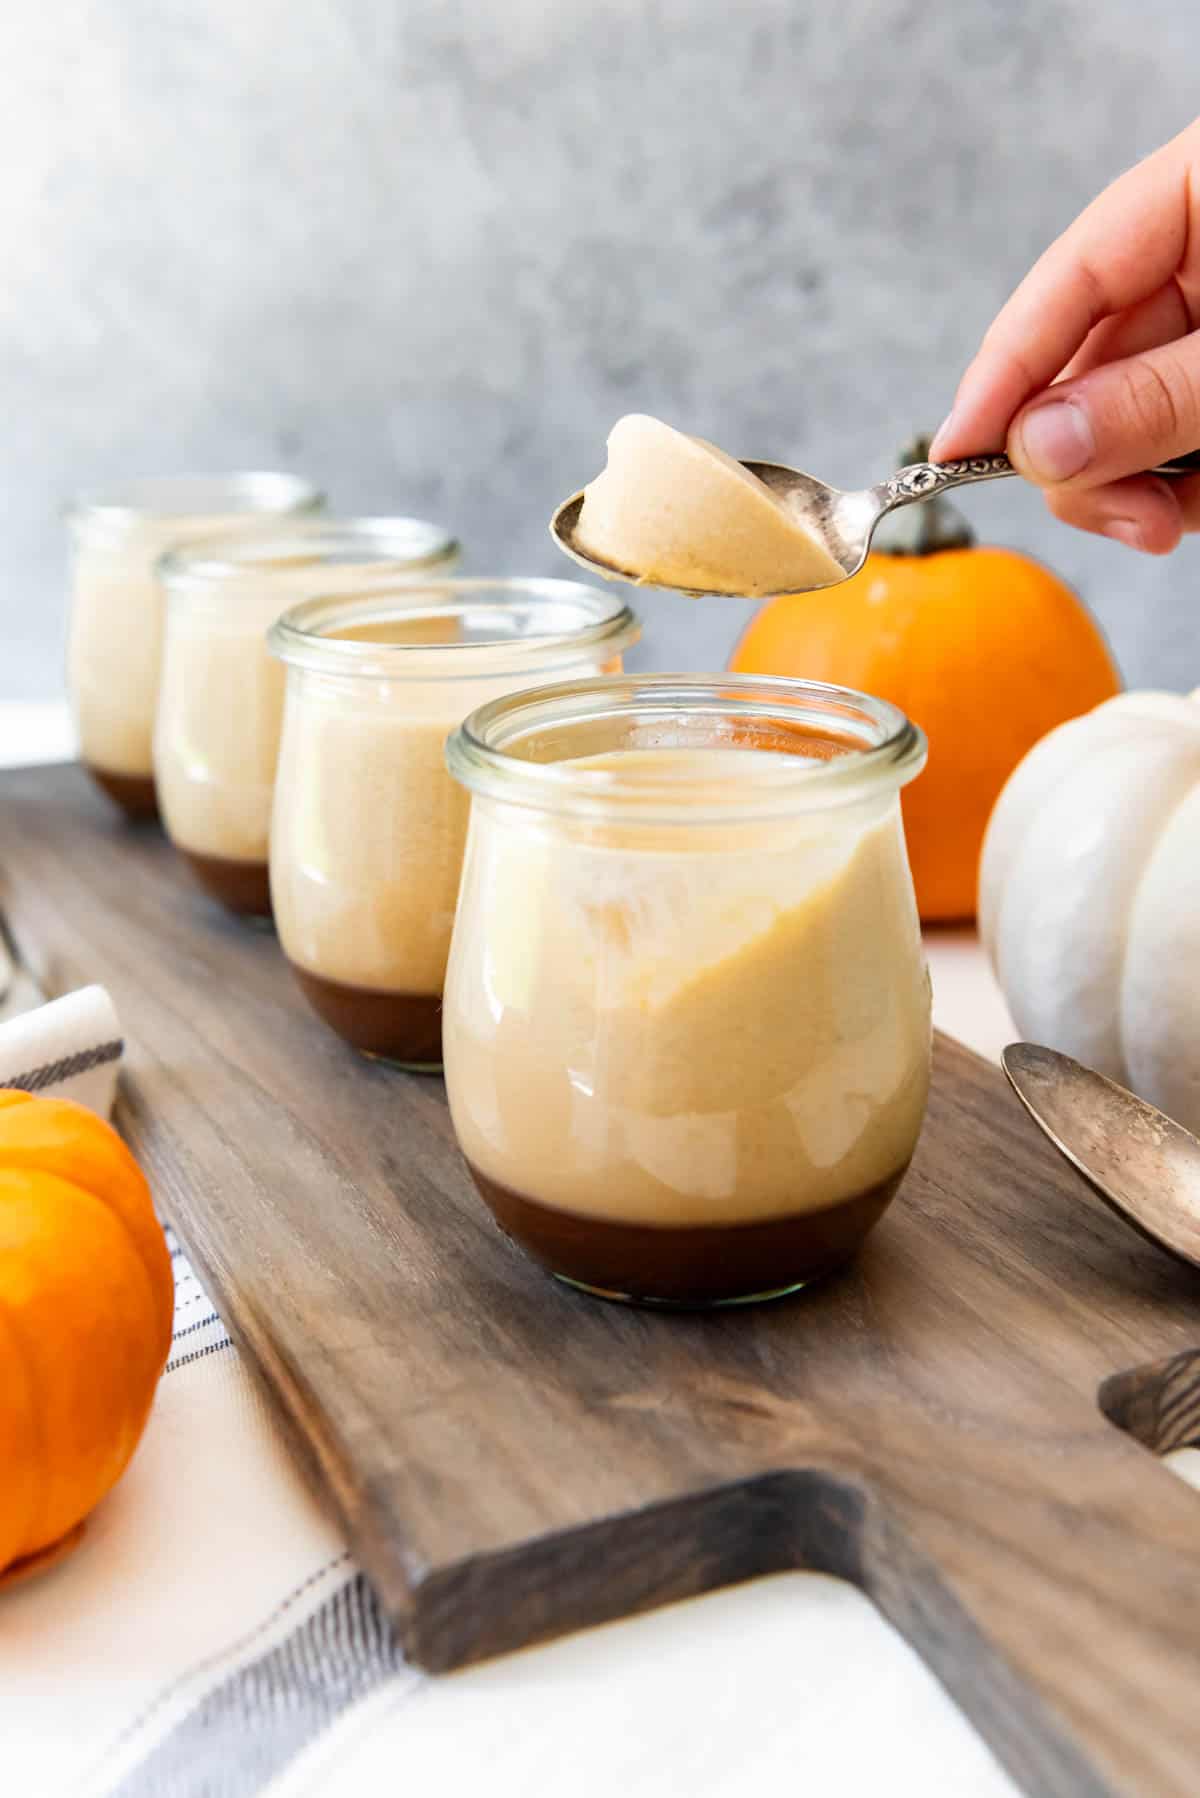 An image of a hand holding a spoon with a scoop of salted caramel pumpkin panna cotta from an individual dessert cup.